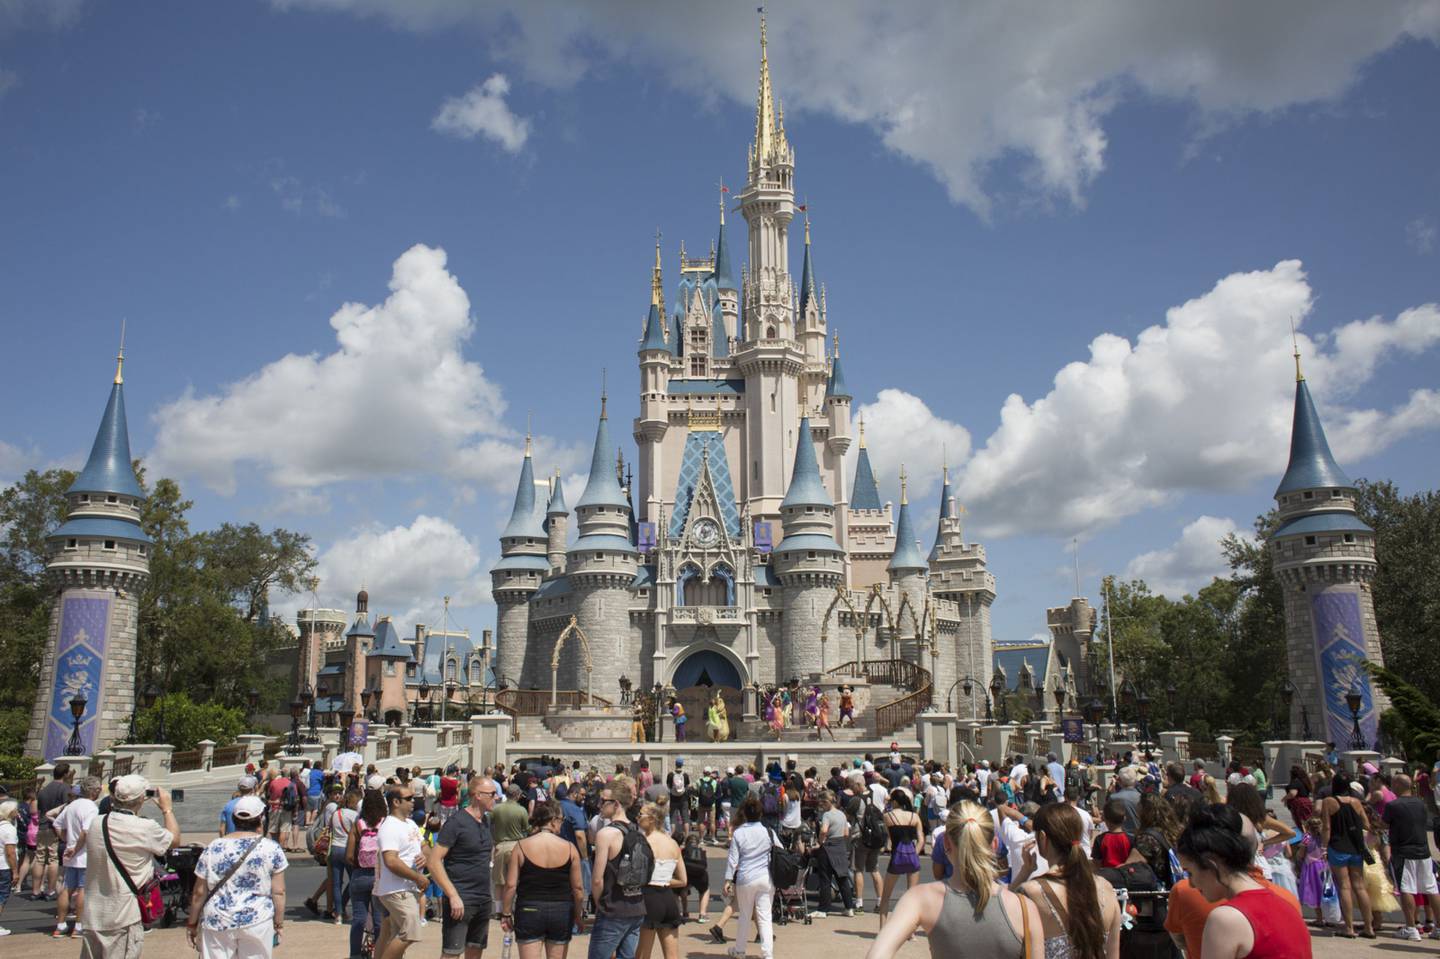 Visitors watch a performance at the Cinderella Castle at the Walt Disney Co. Magic Kingdom park in Orlando, Florida, U.S., on Tuesday, Sept. 12, 2017. The Walt Disney Co. Magic Kingdom park reopened to a smaller-than-usual crowd after closing for two days and suffering minor storm damage from Hurricane Irma.dfd